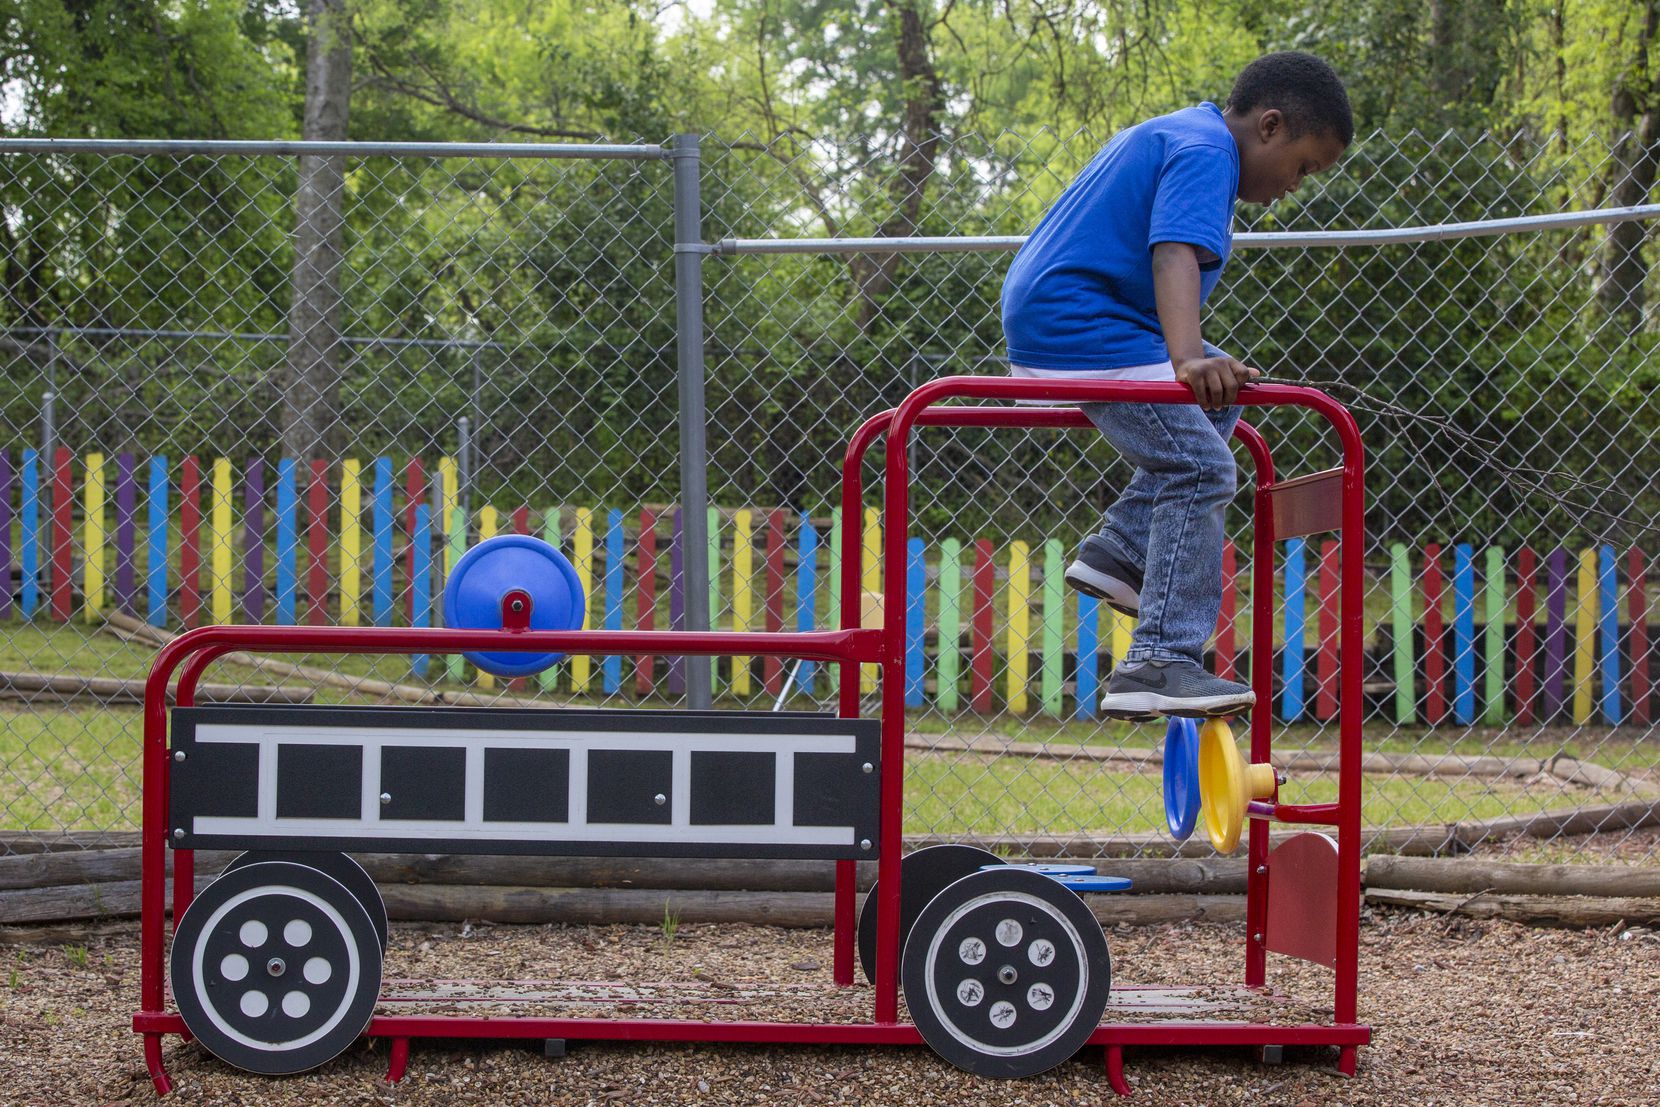 J'airus Randall, 8, plays on a fire truck toy during outdoor playtime at A Heart To Give...